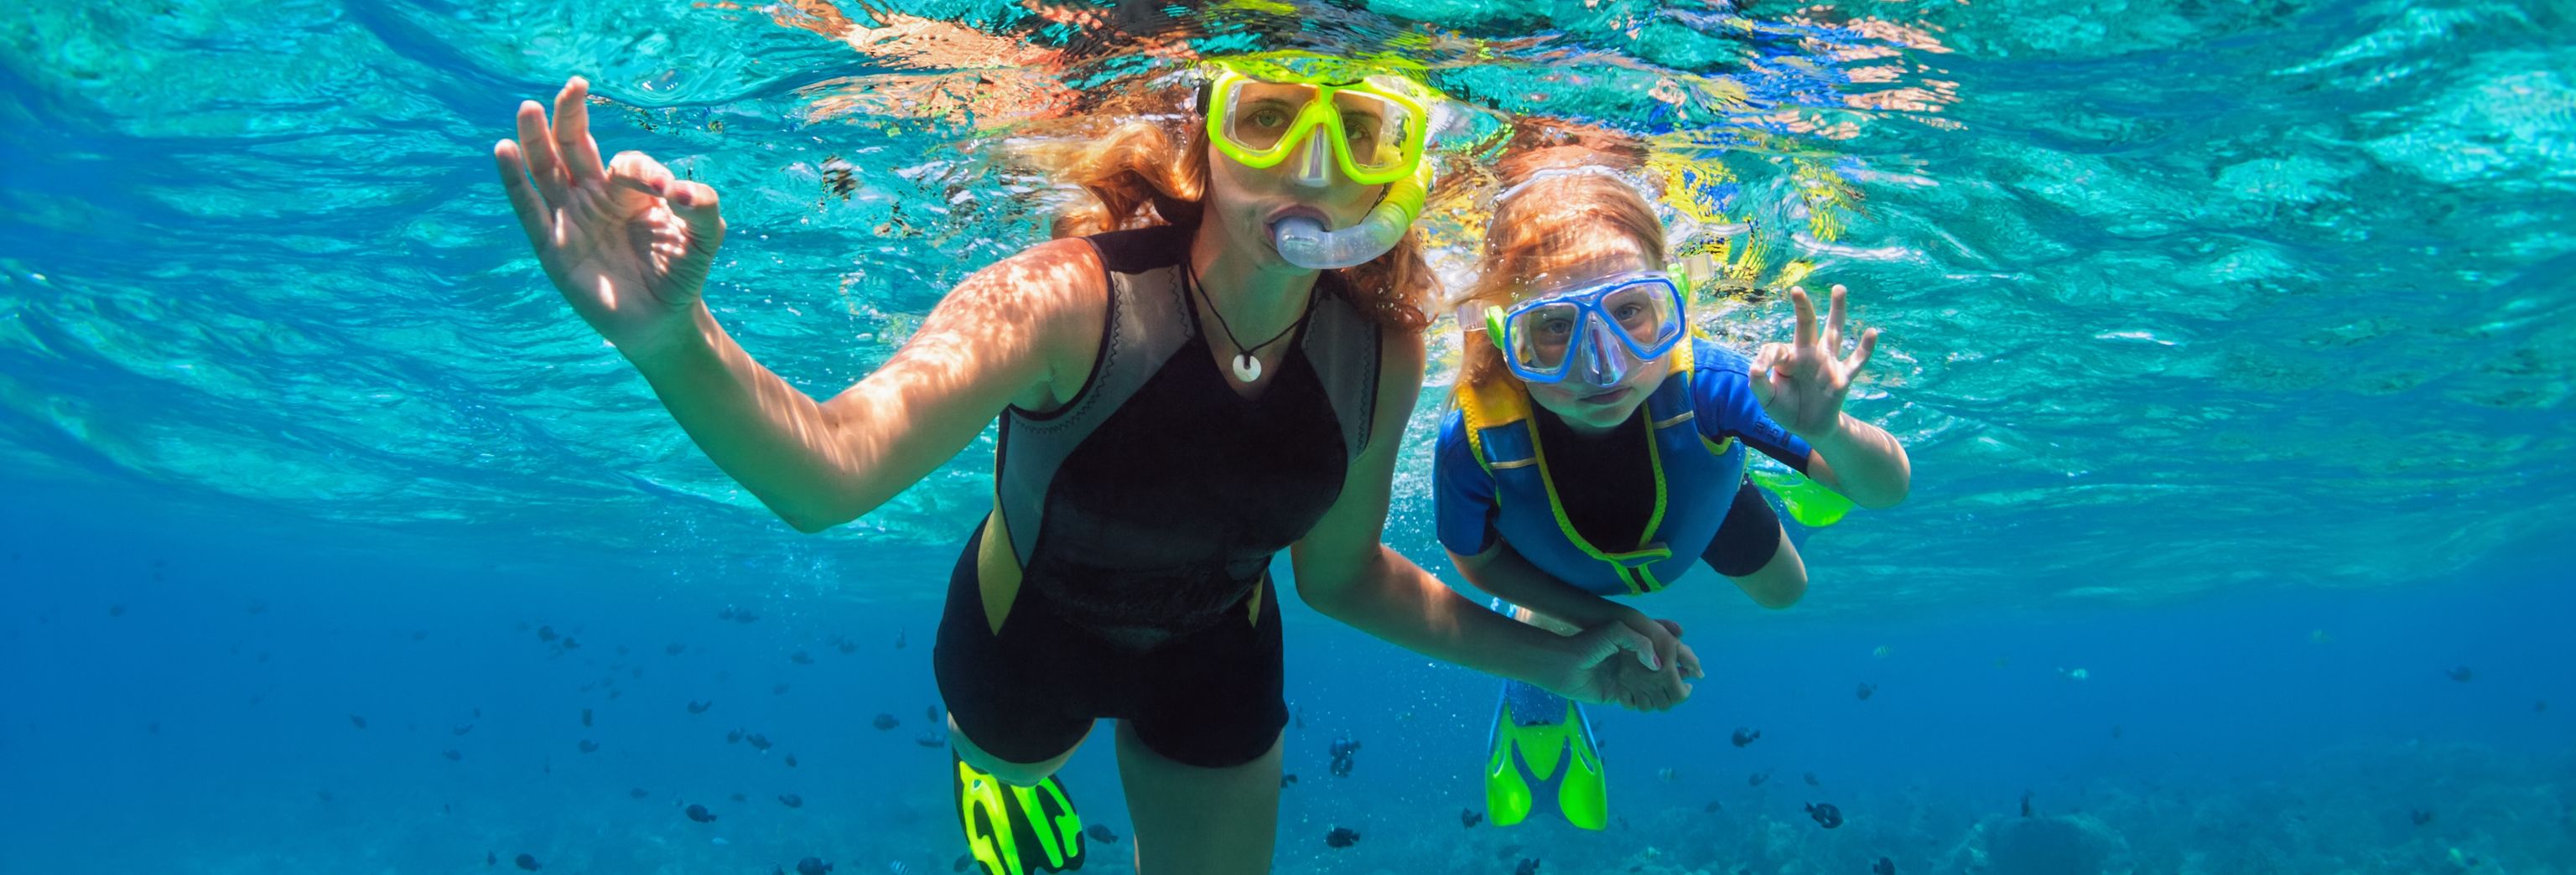 Snorkeling, fun for the whole family!